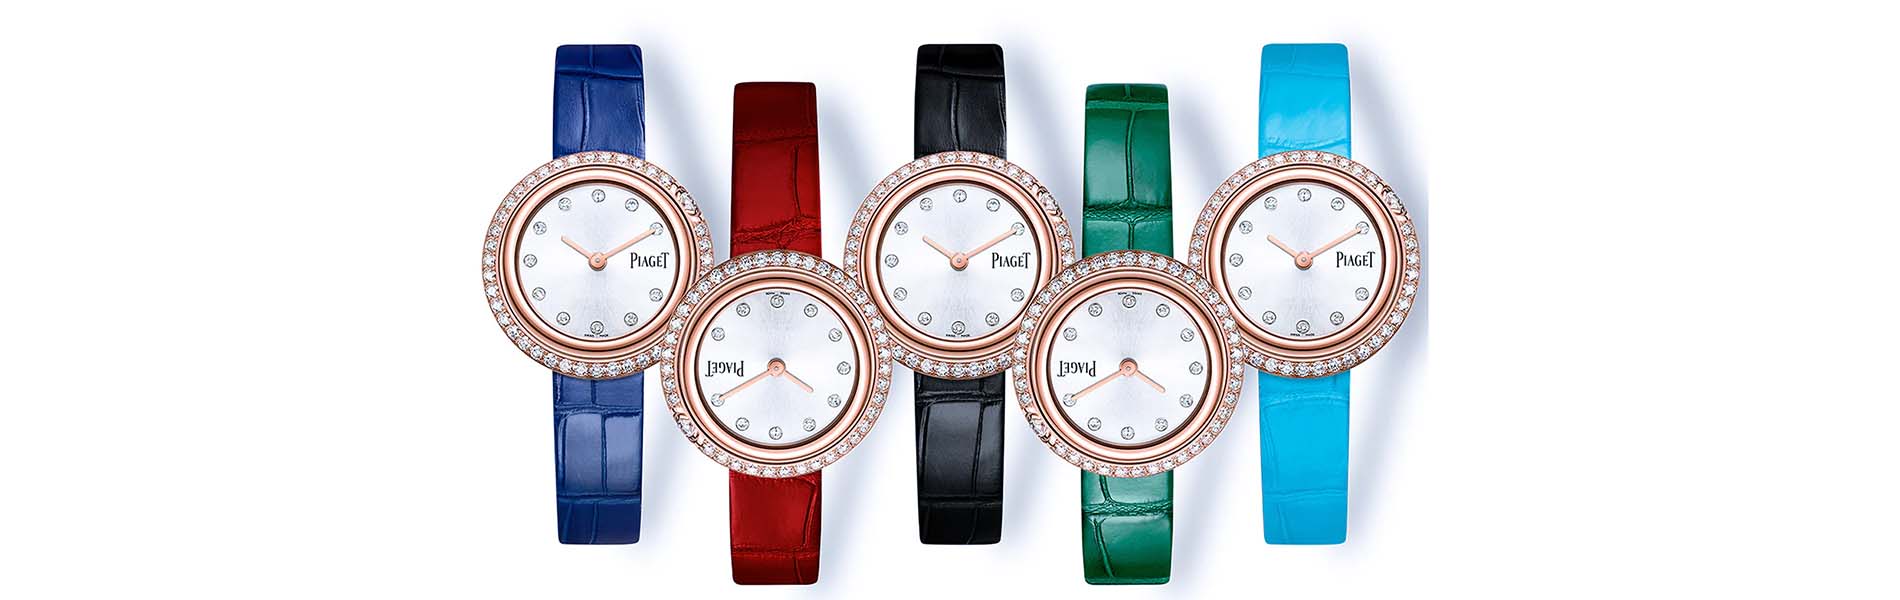 Piaget Possession Timepieces